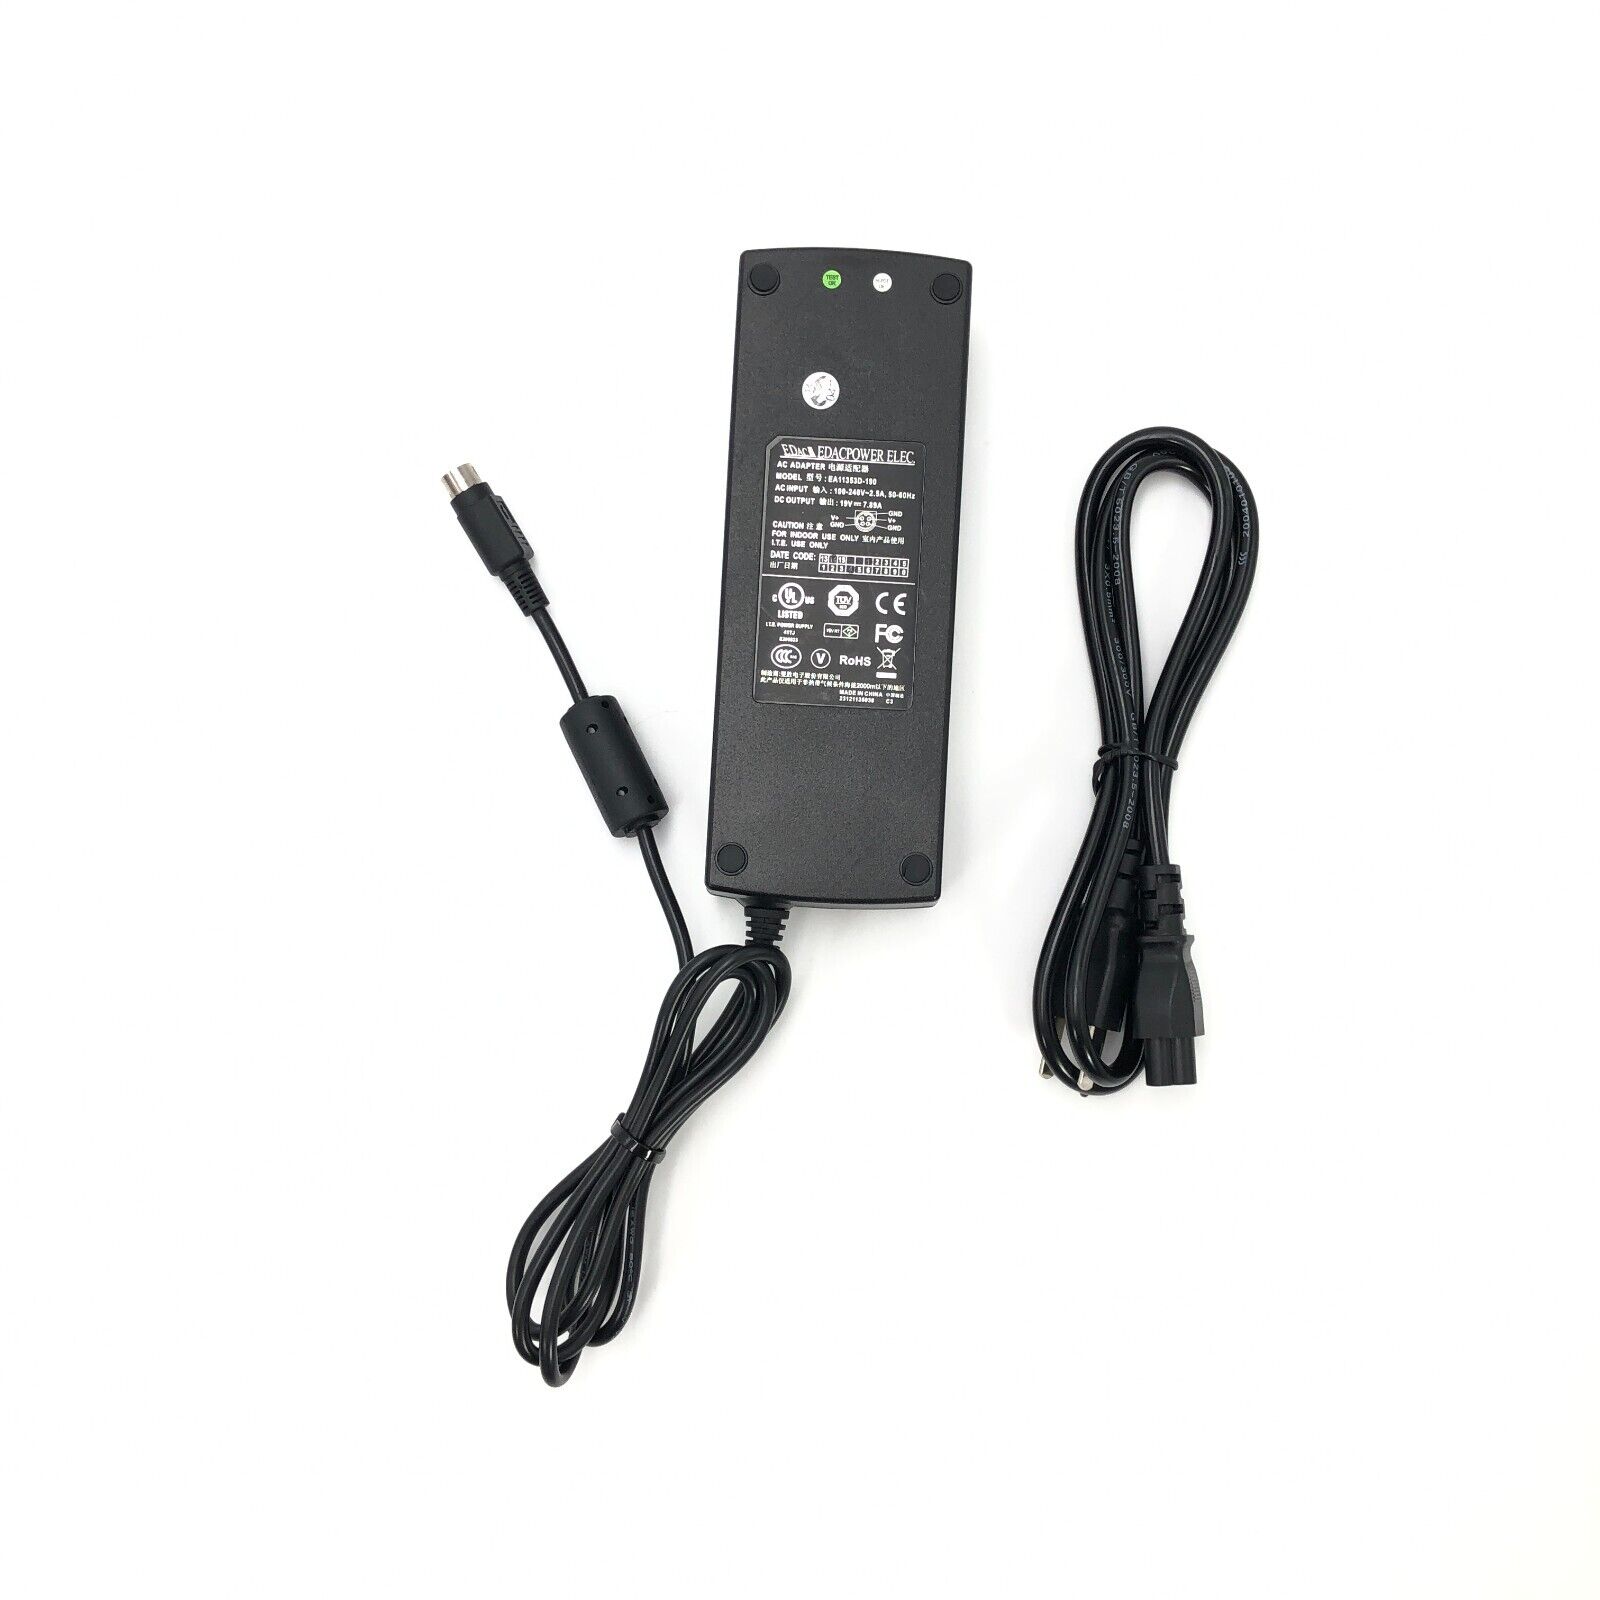 *Brand NEW*Genuine 4-Pin Edac 19V 7.89A AC Adapter for FSP IPC912-213-FL-A w/Power Cord Power Supply